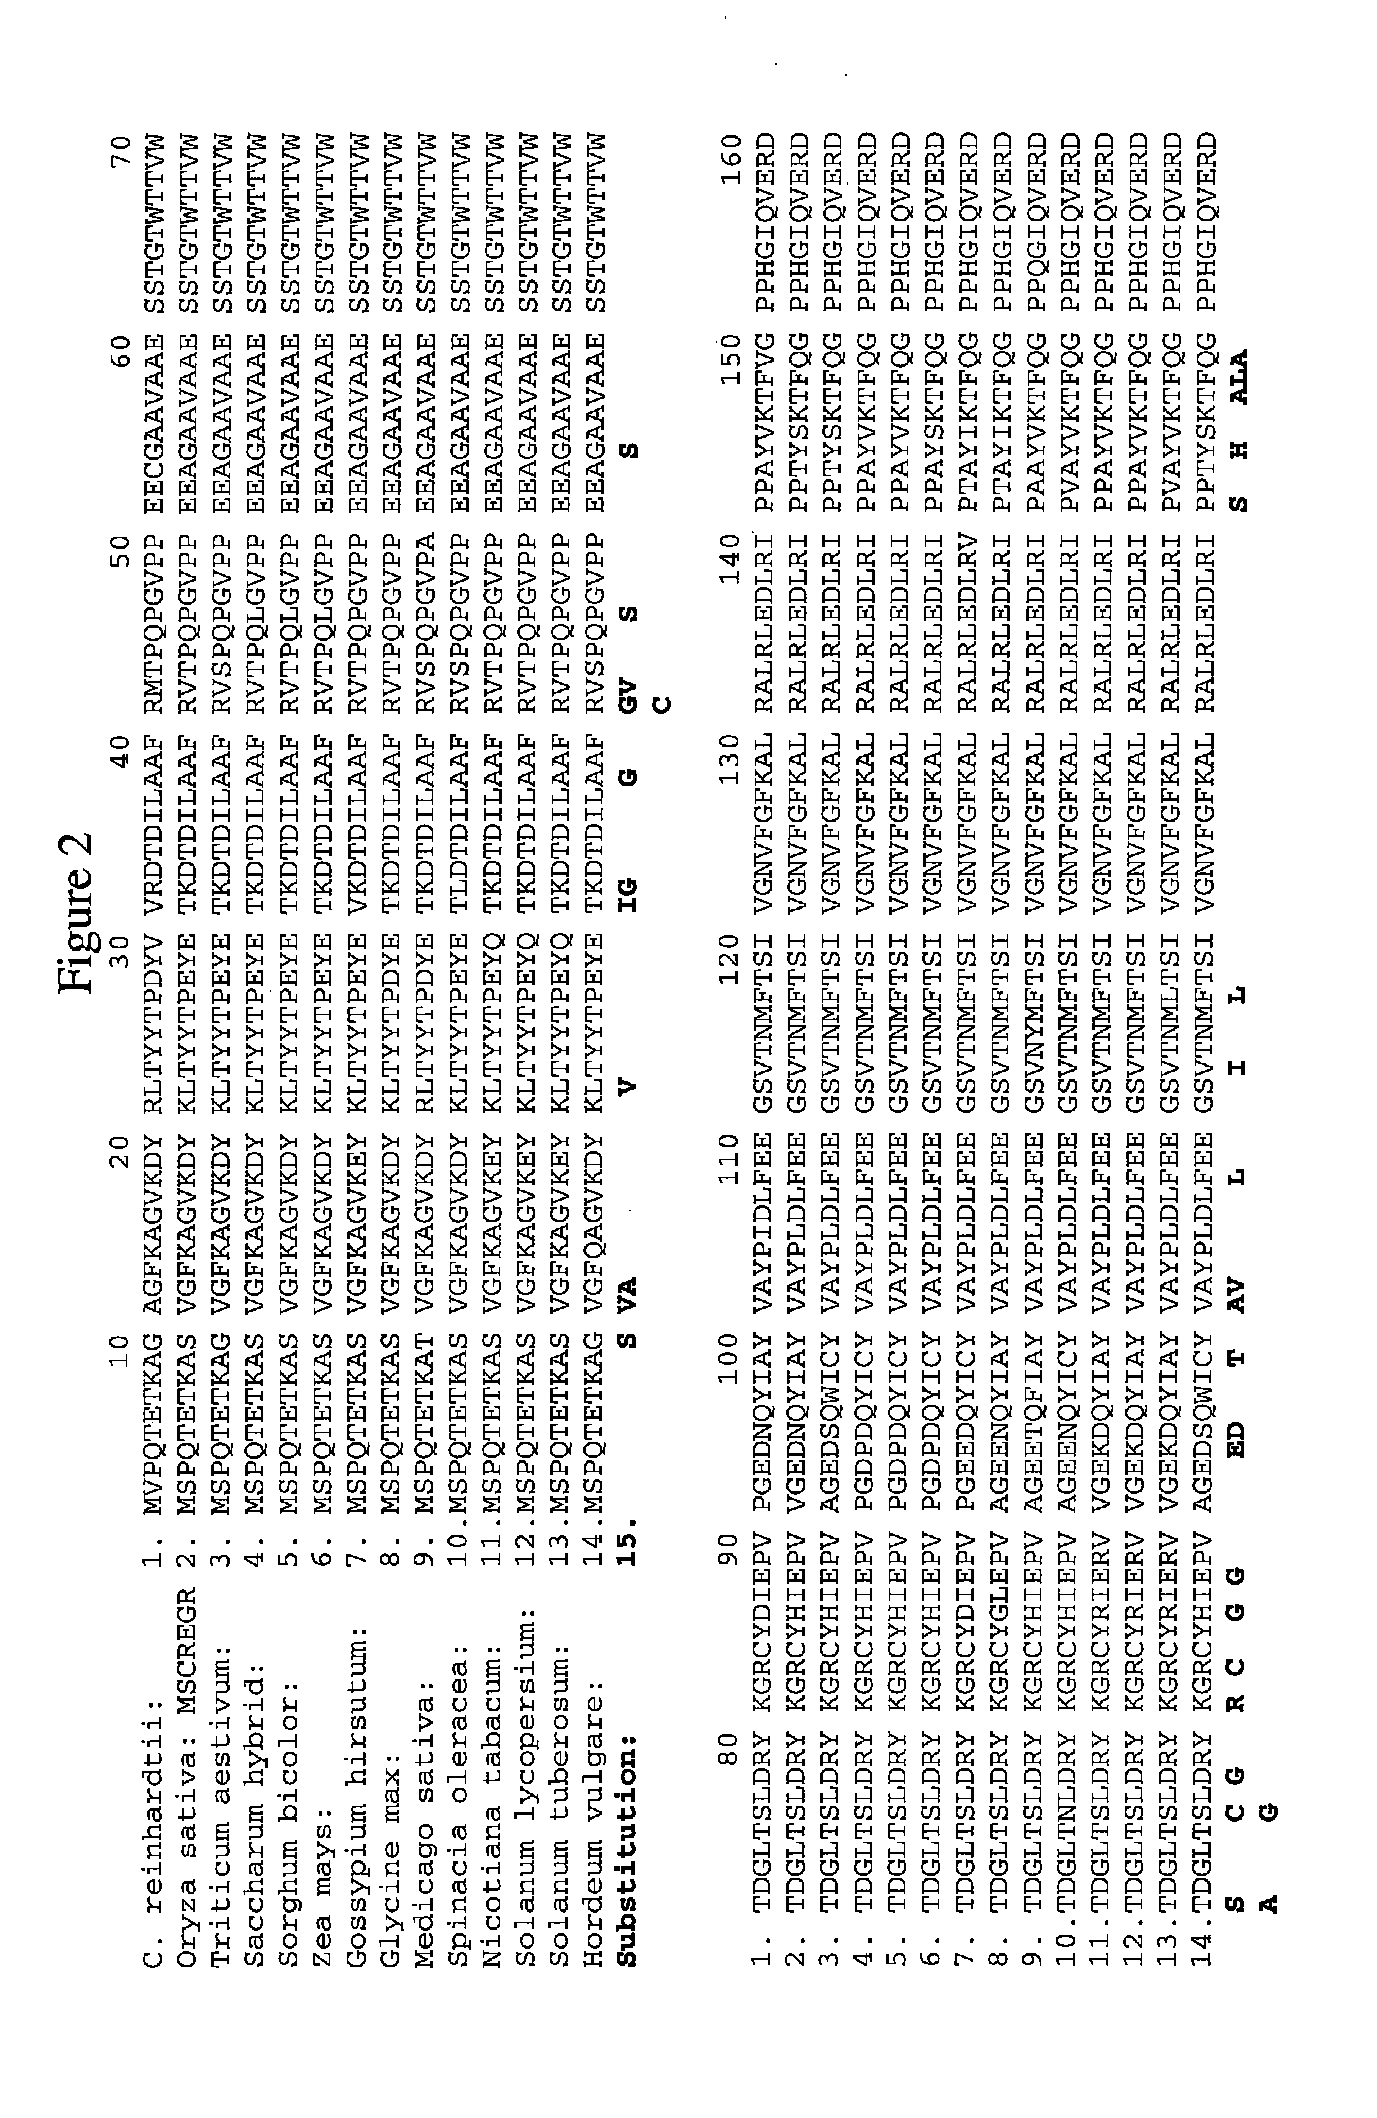 Methods of identifying and creating rubisco large subunit variants with improved rubisco activity,  compositions and methods of use thereof